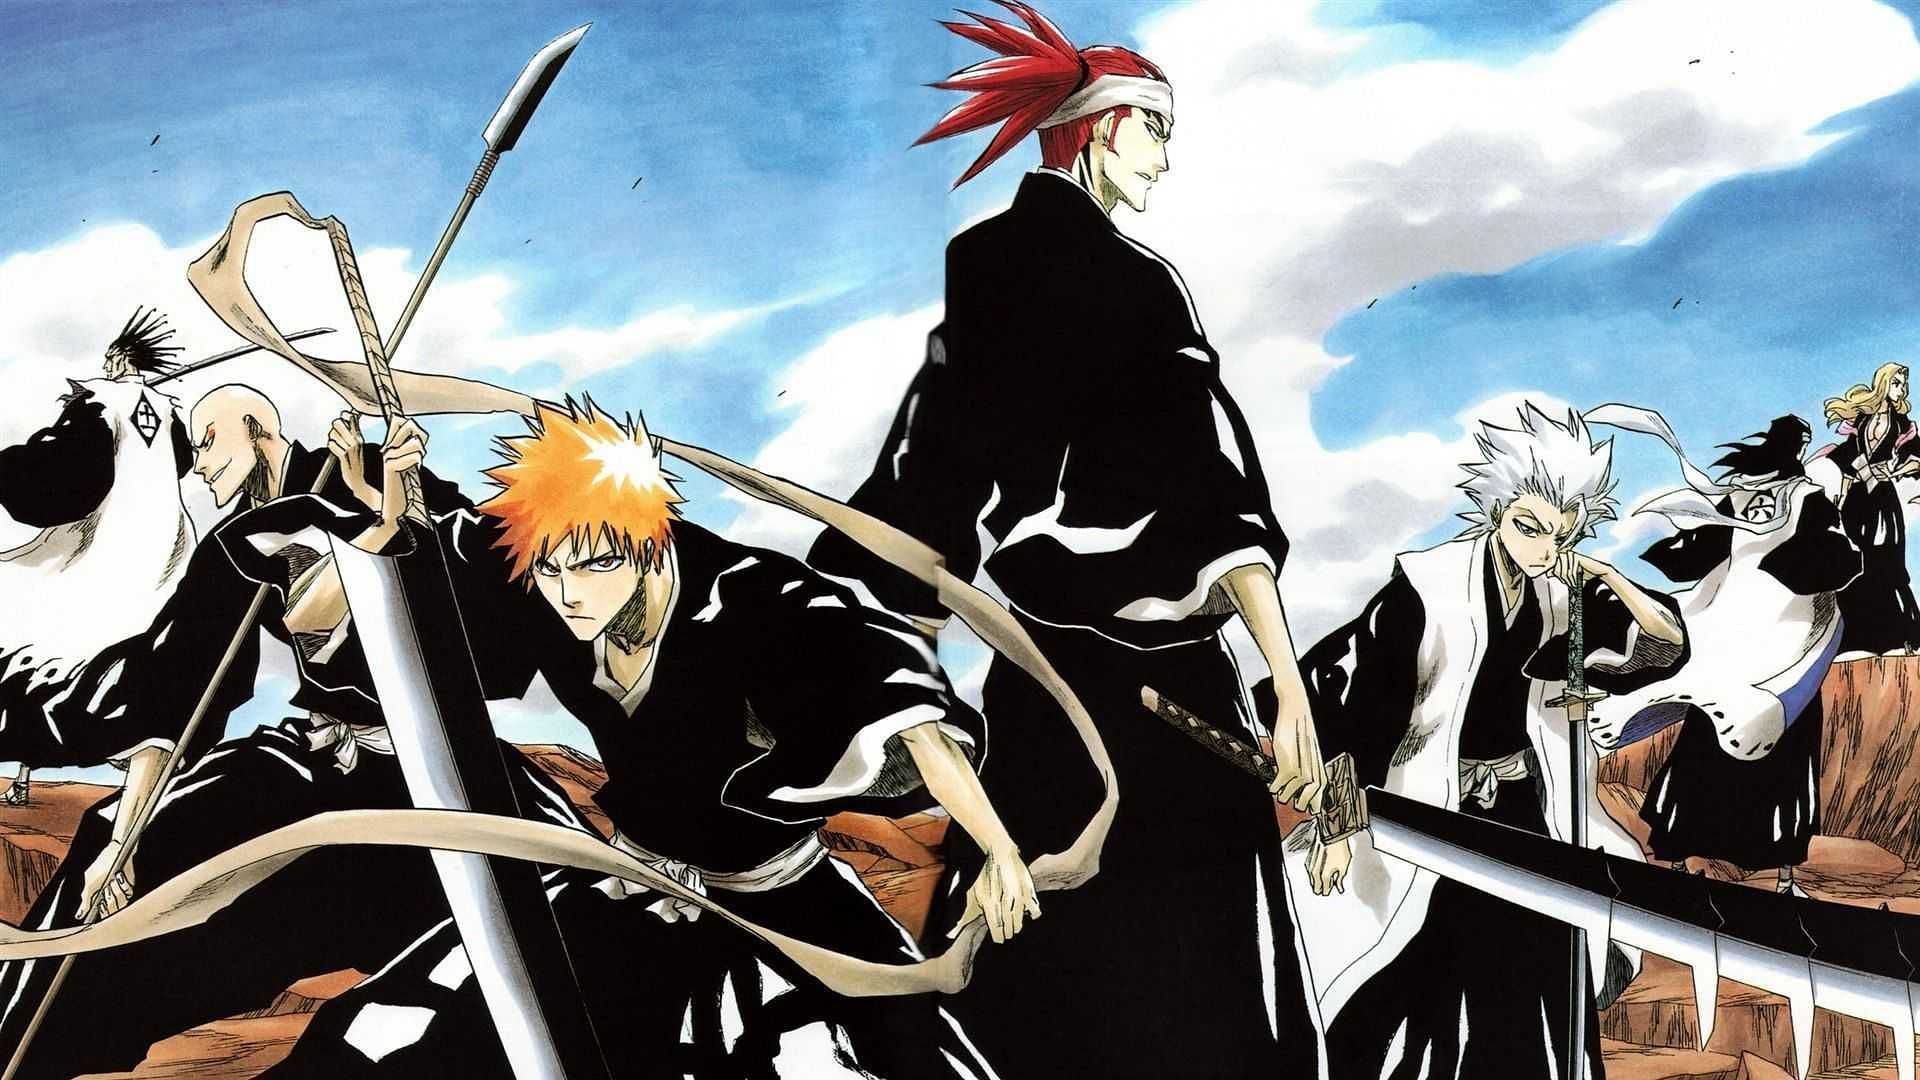 Bleach: Every Arc You Need To Watch Before The Final Season